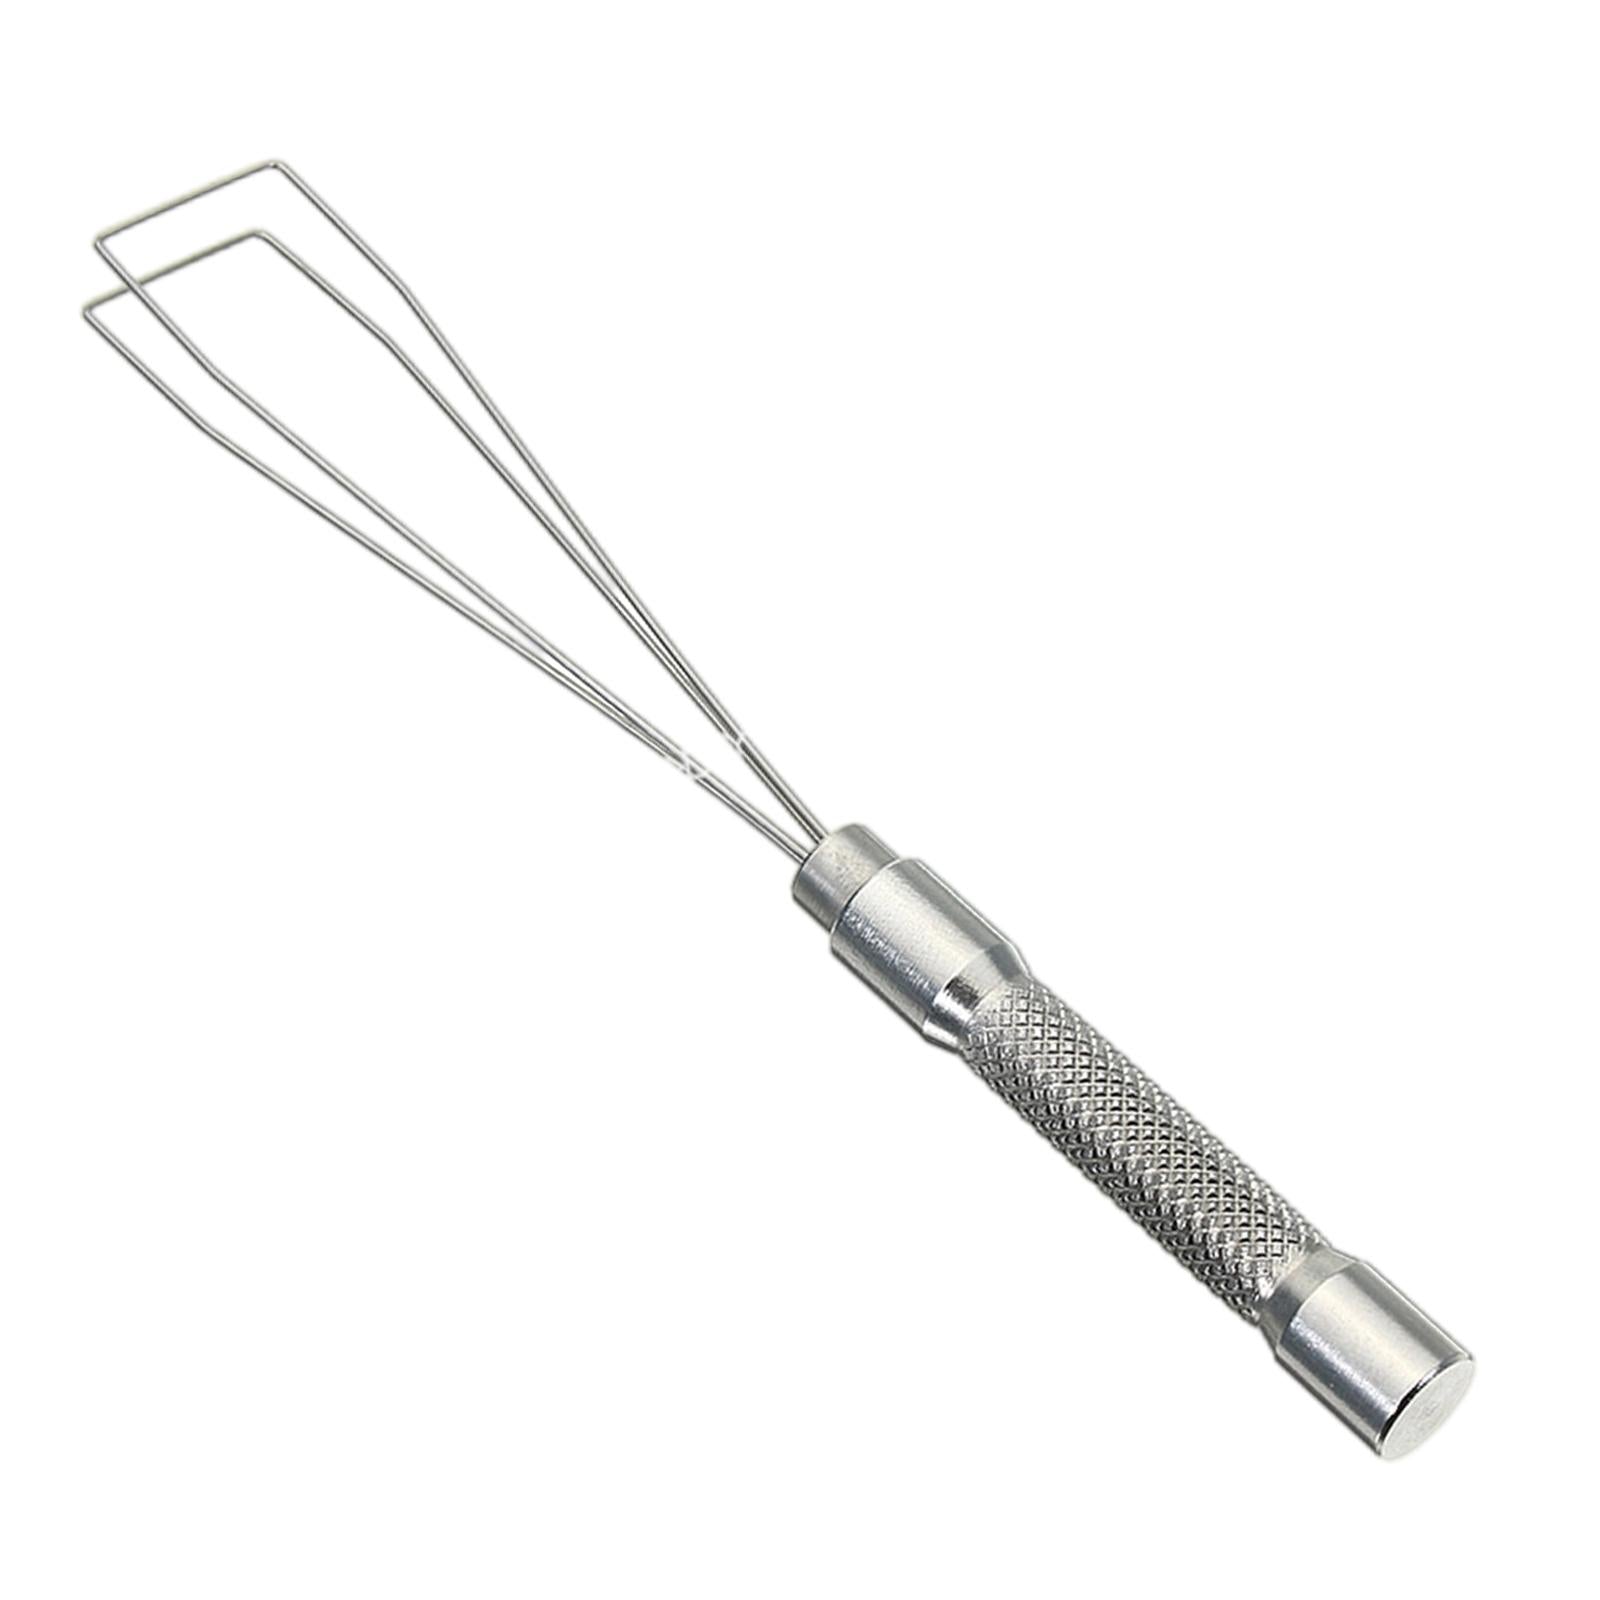 Mechanical Keyboard Key Keycap Puller Stainless Steel Tool For Cleaning